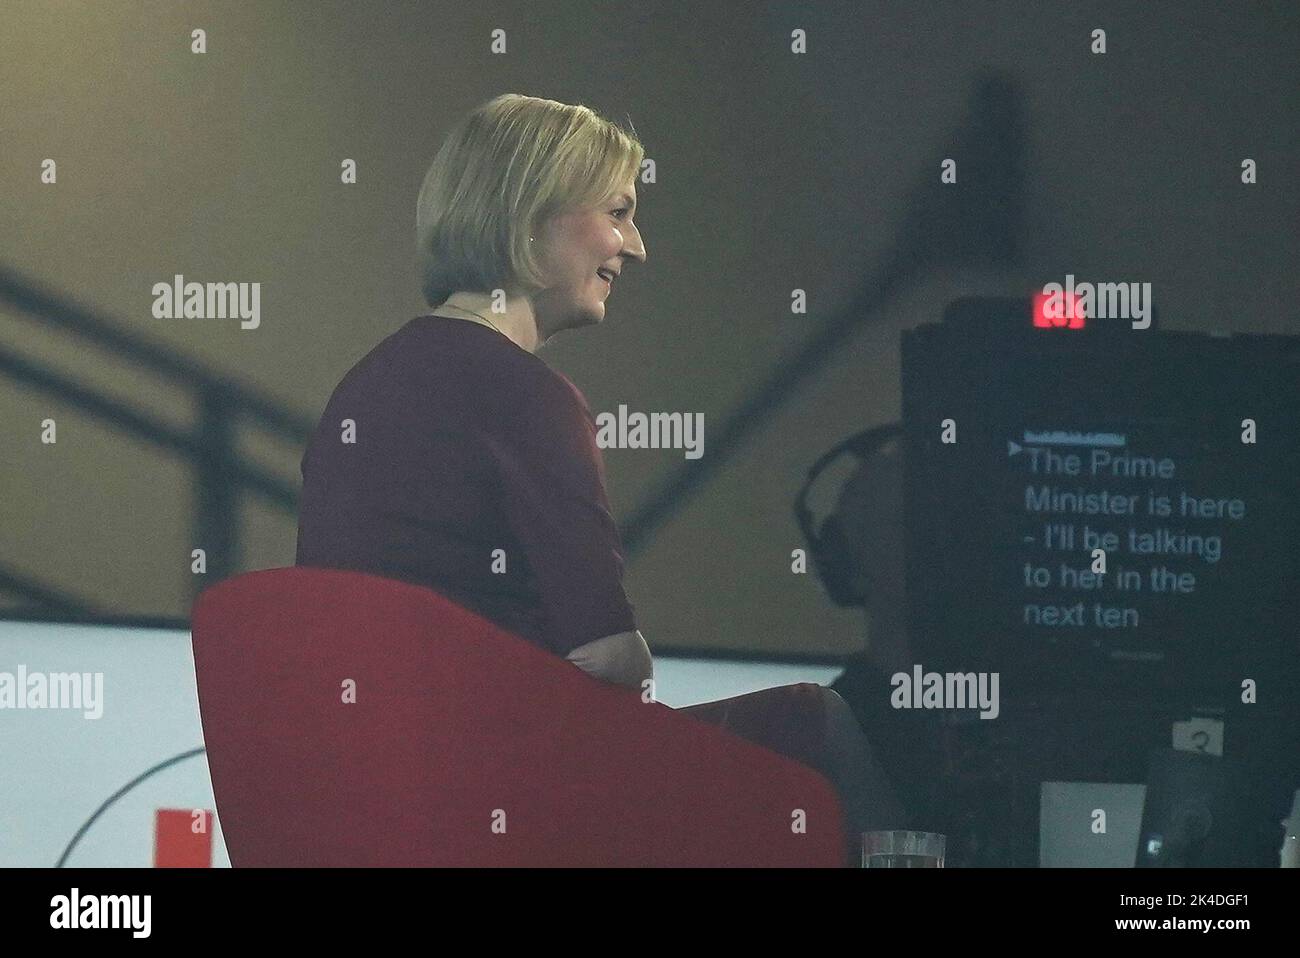 Prime Minister Liz Truss in the BBC studio in Birmingham to appear on the BBC1 current affairs programme, Sunday with Laura Kuenssberg, as the Conservative Party annual conference gets underway at the International Convention Centre in Birmingham. Picture date: Sunday October 2, 2022. Stock Photo